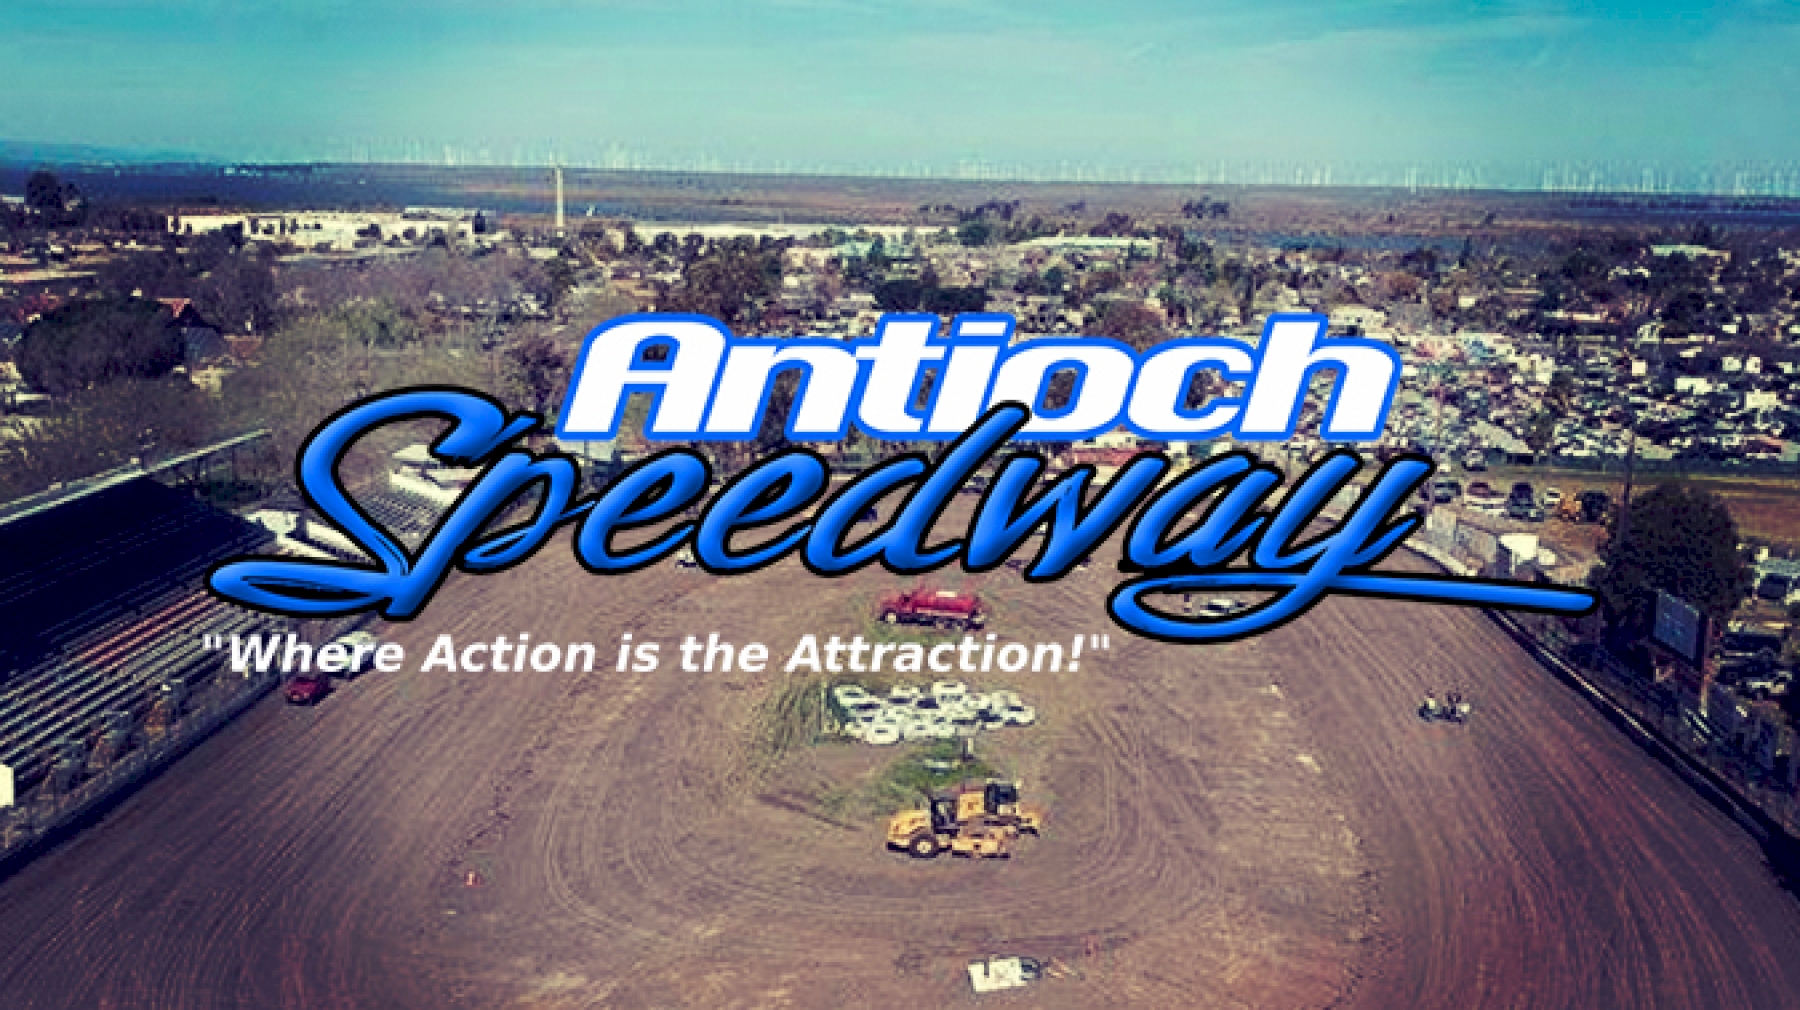 2020 Weekly Racing at Antioch Speedway News FloRacing